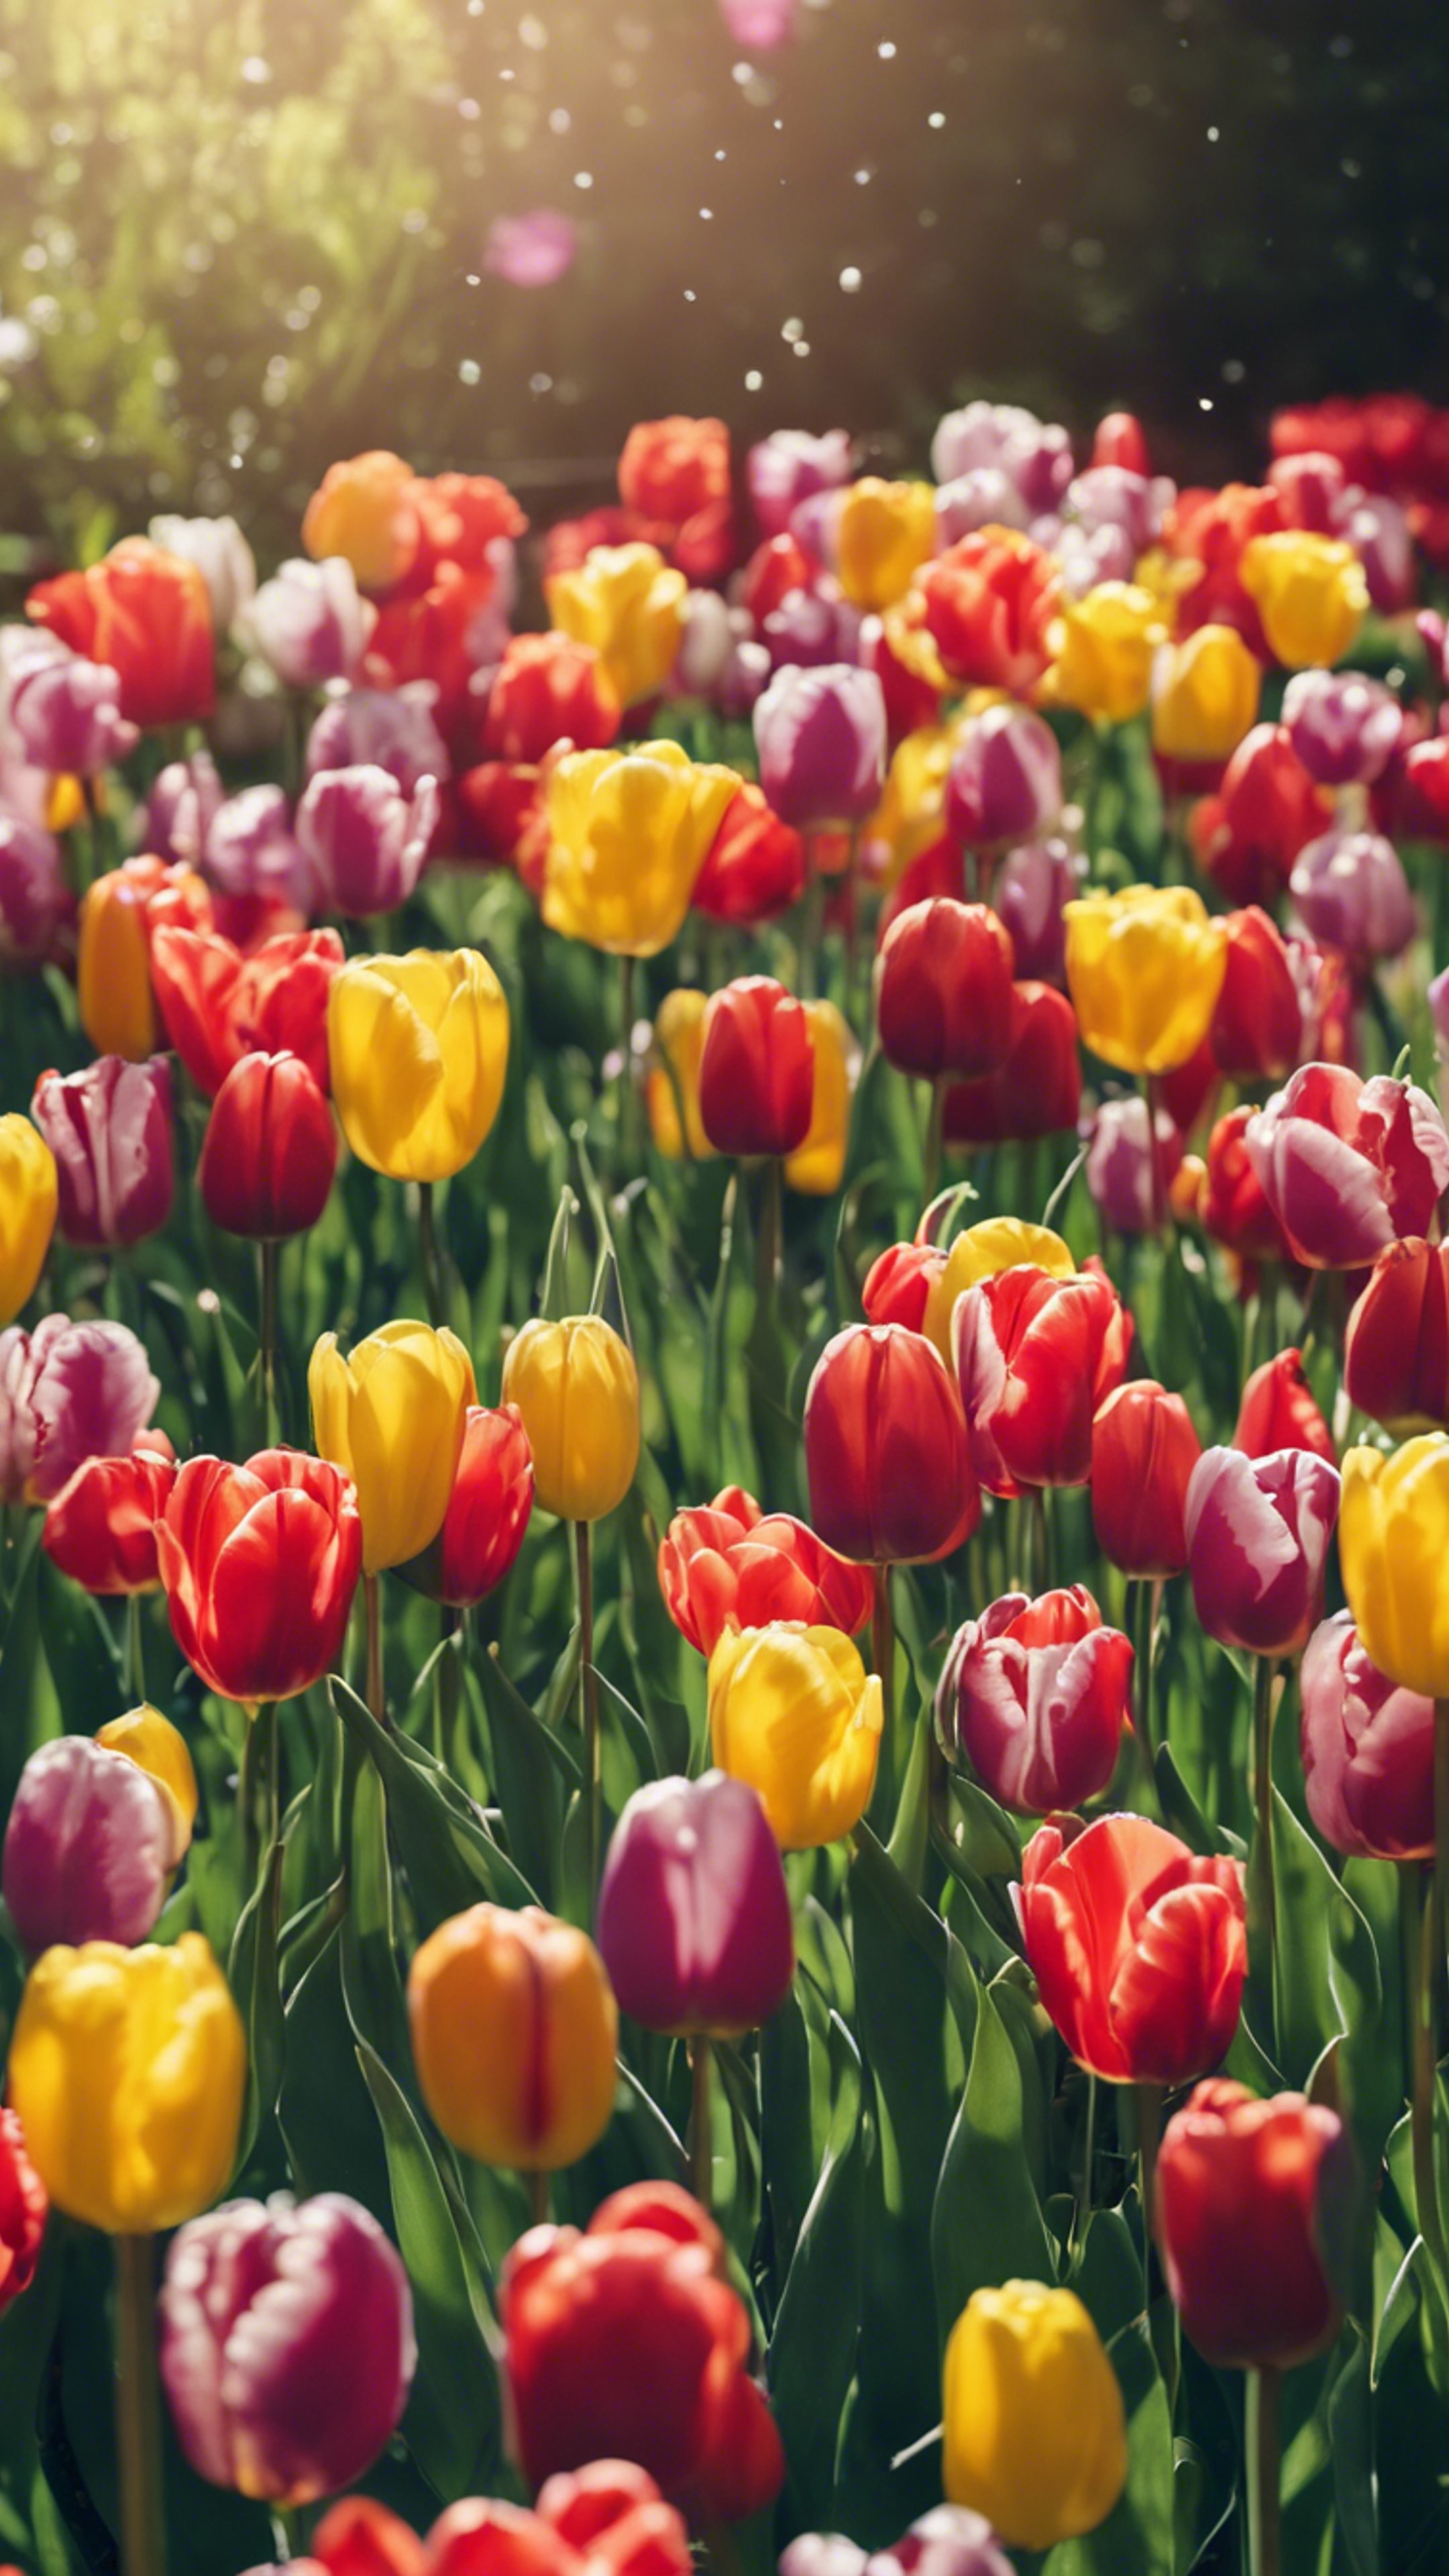 An array of colorful tulips fully bloomed in a sunny spring garden.壁紙[7f2098350fac4f0fbaaa]